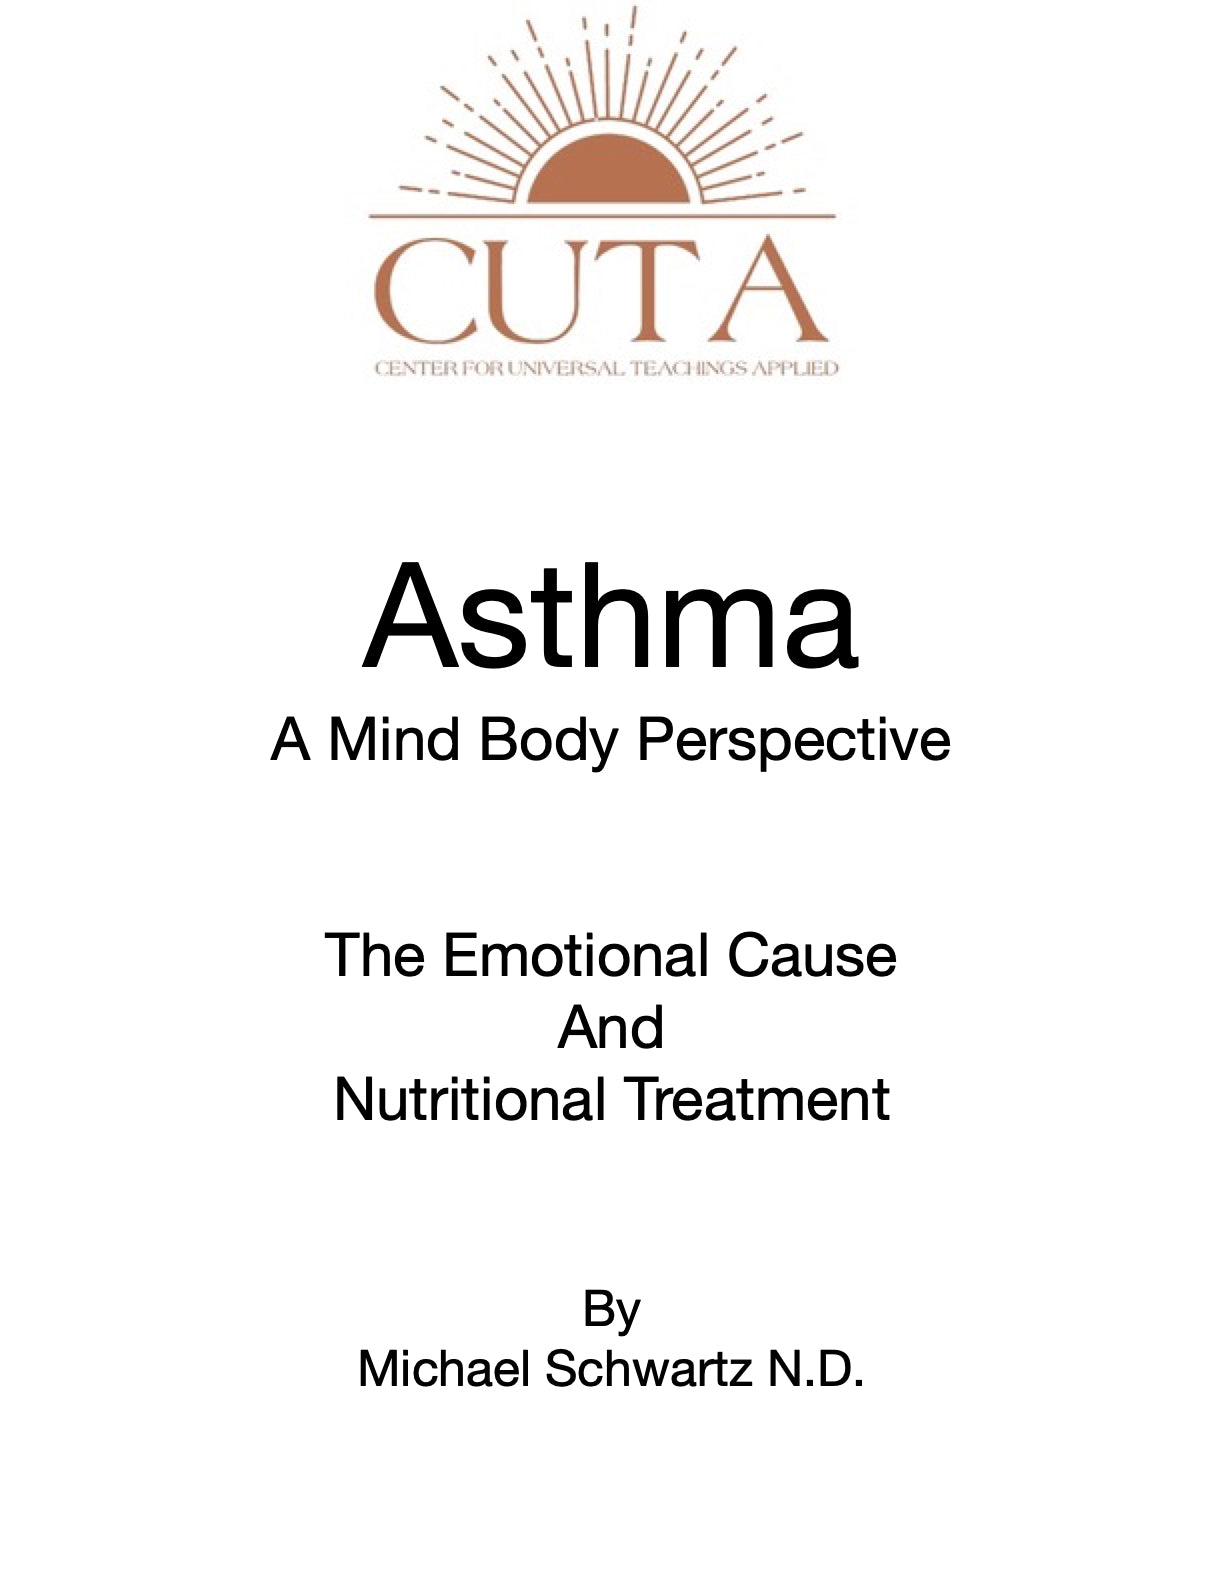 Asthma Booklet